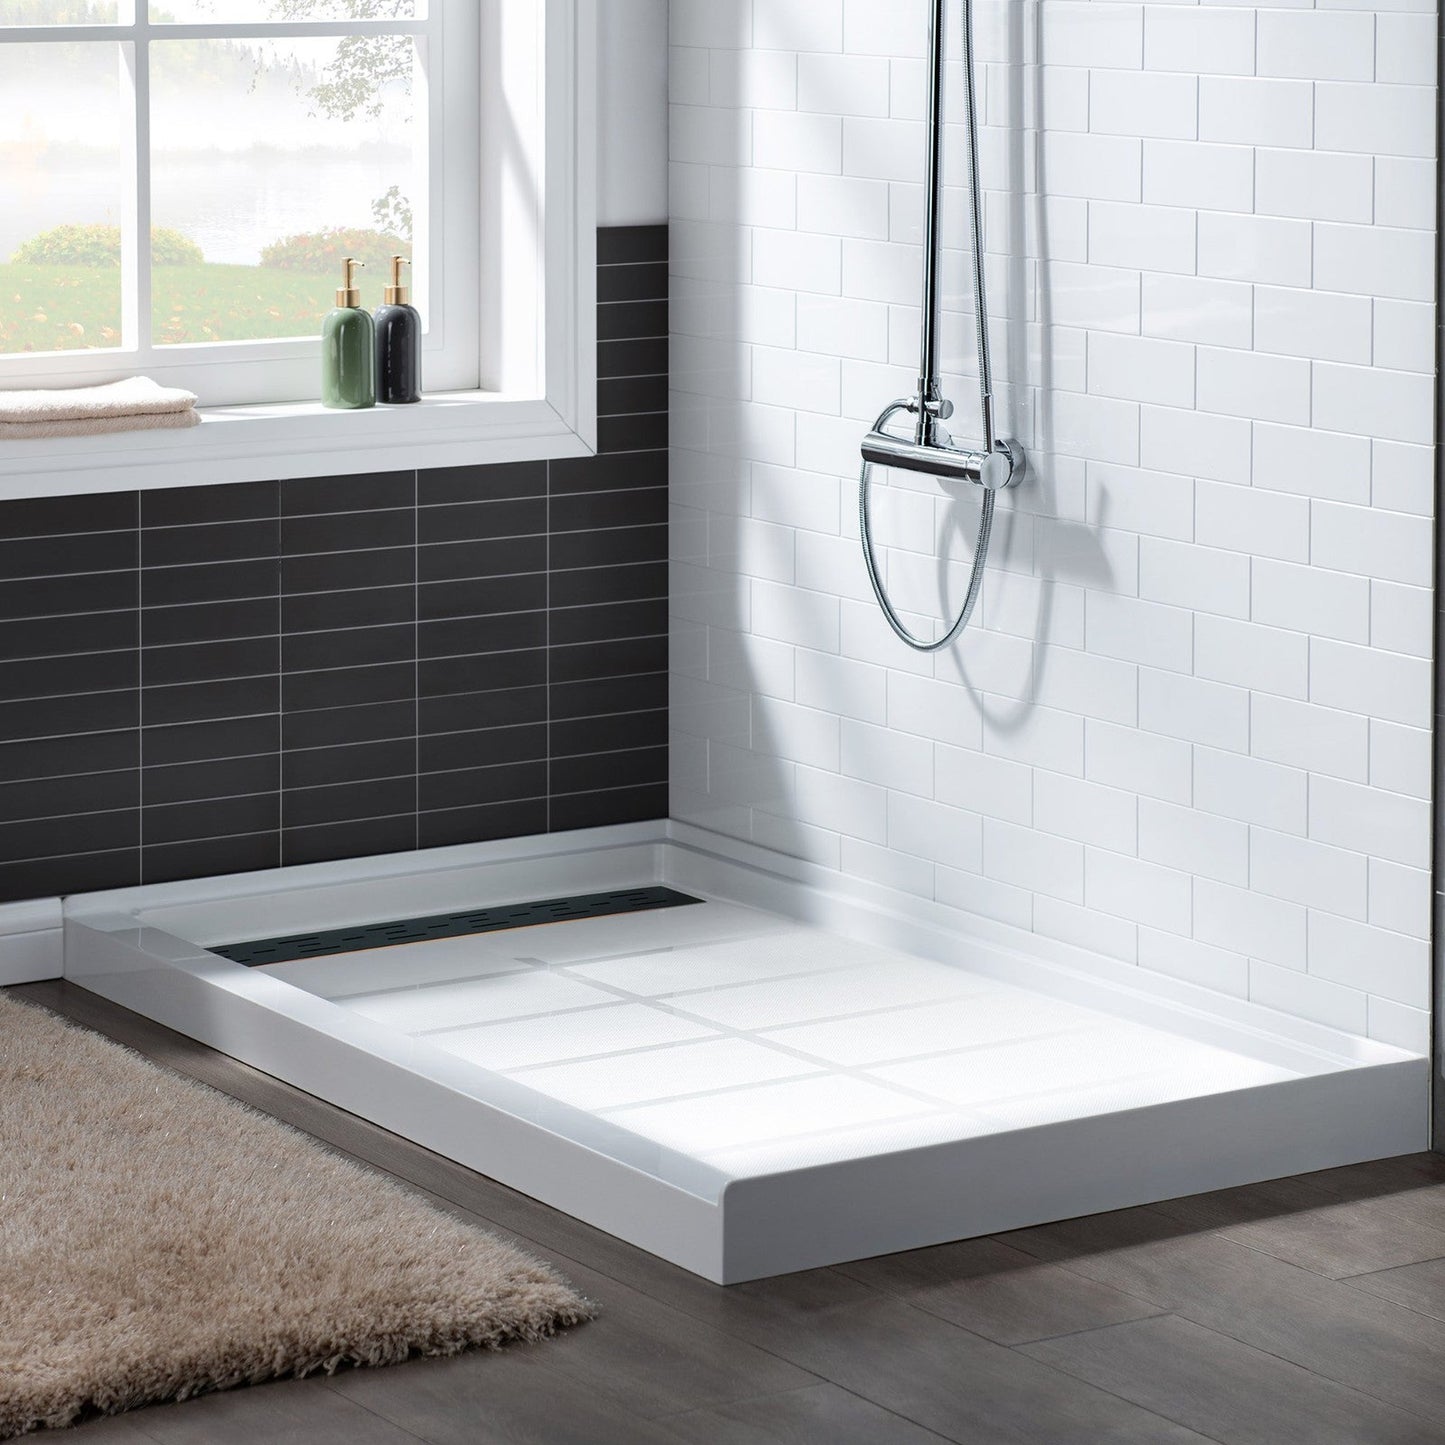 WoodBridge 48" x 36" White Solid Surface Shower Base Left Drain Location With Oil Rubbed Bronze Trench Drain Cover